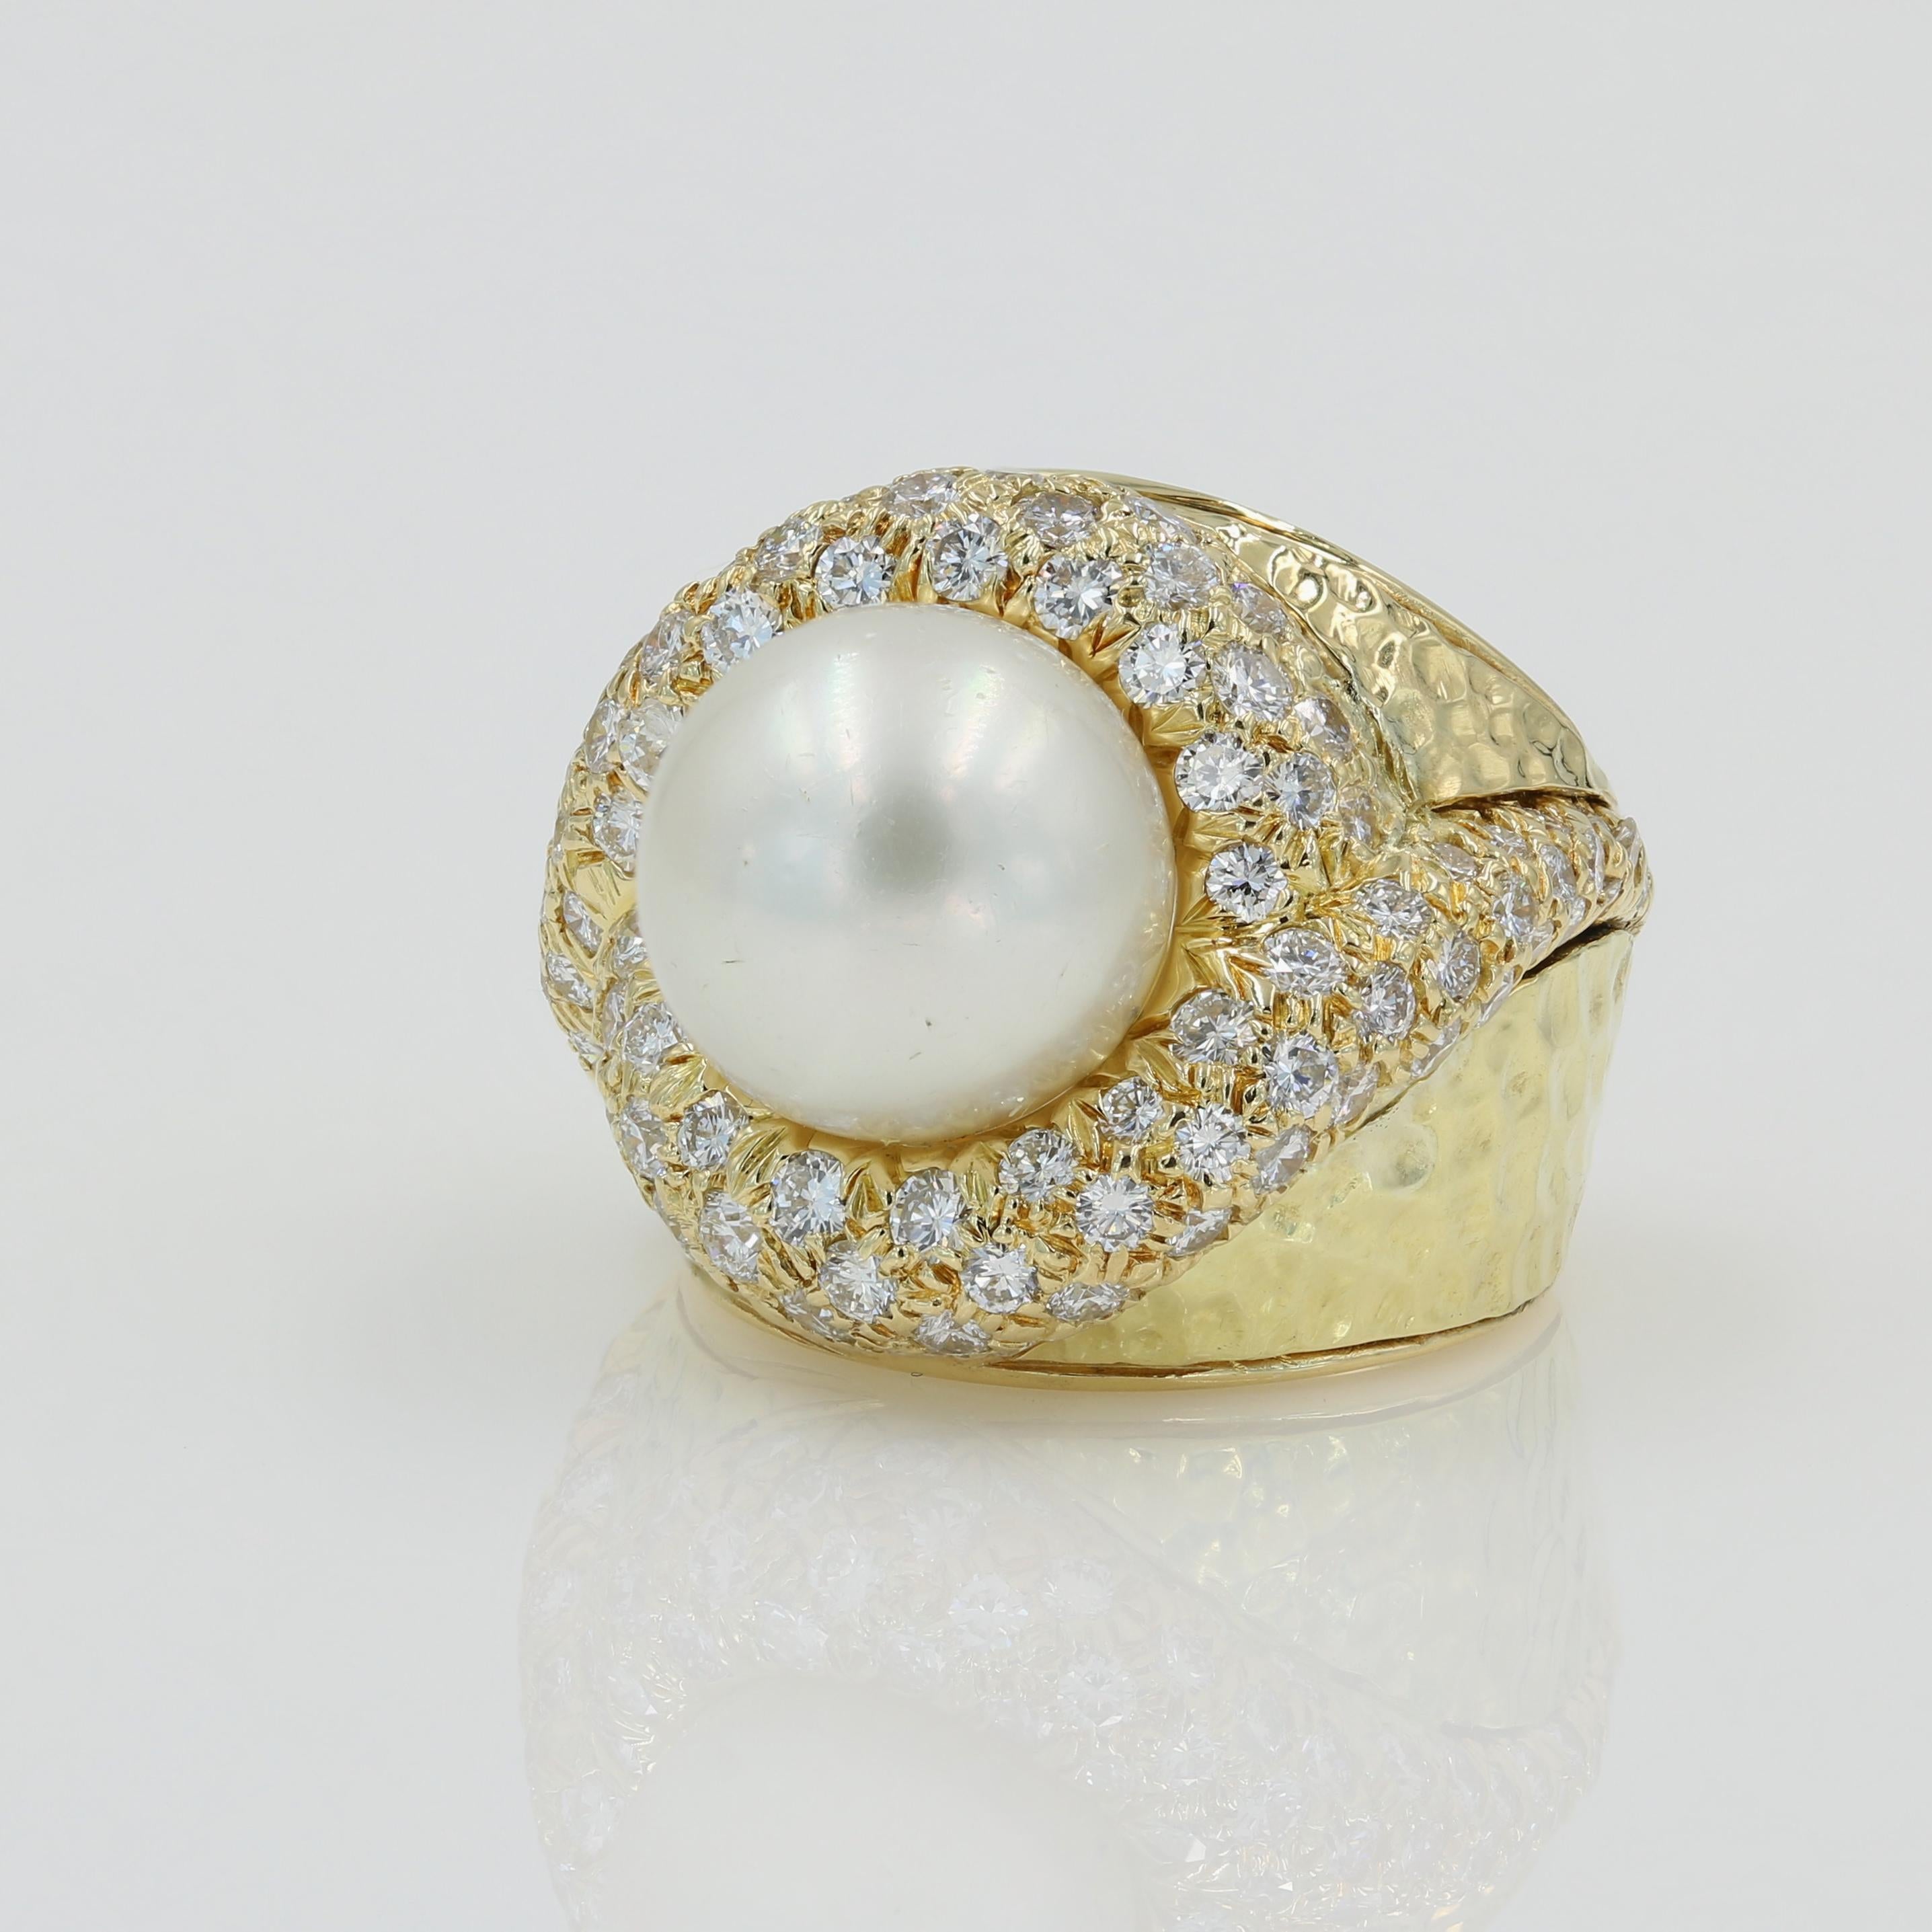 Cultured Pearl & Pave Diamond Ring in 18kt YG - featuring a 11.5mm fine white cultured pearl. Approximately 102 round cut diamonds (G-H VS) that weight about 2.92ctw. Hand hammered finish. Ring is pre-owned.  Weighs 13.9DWT and size is around 6 1/2.